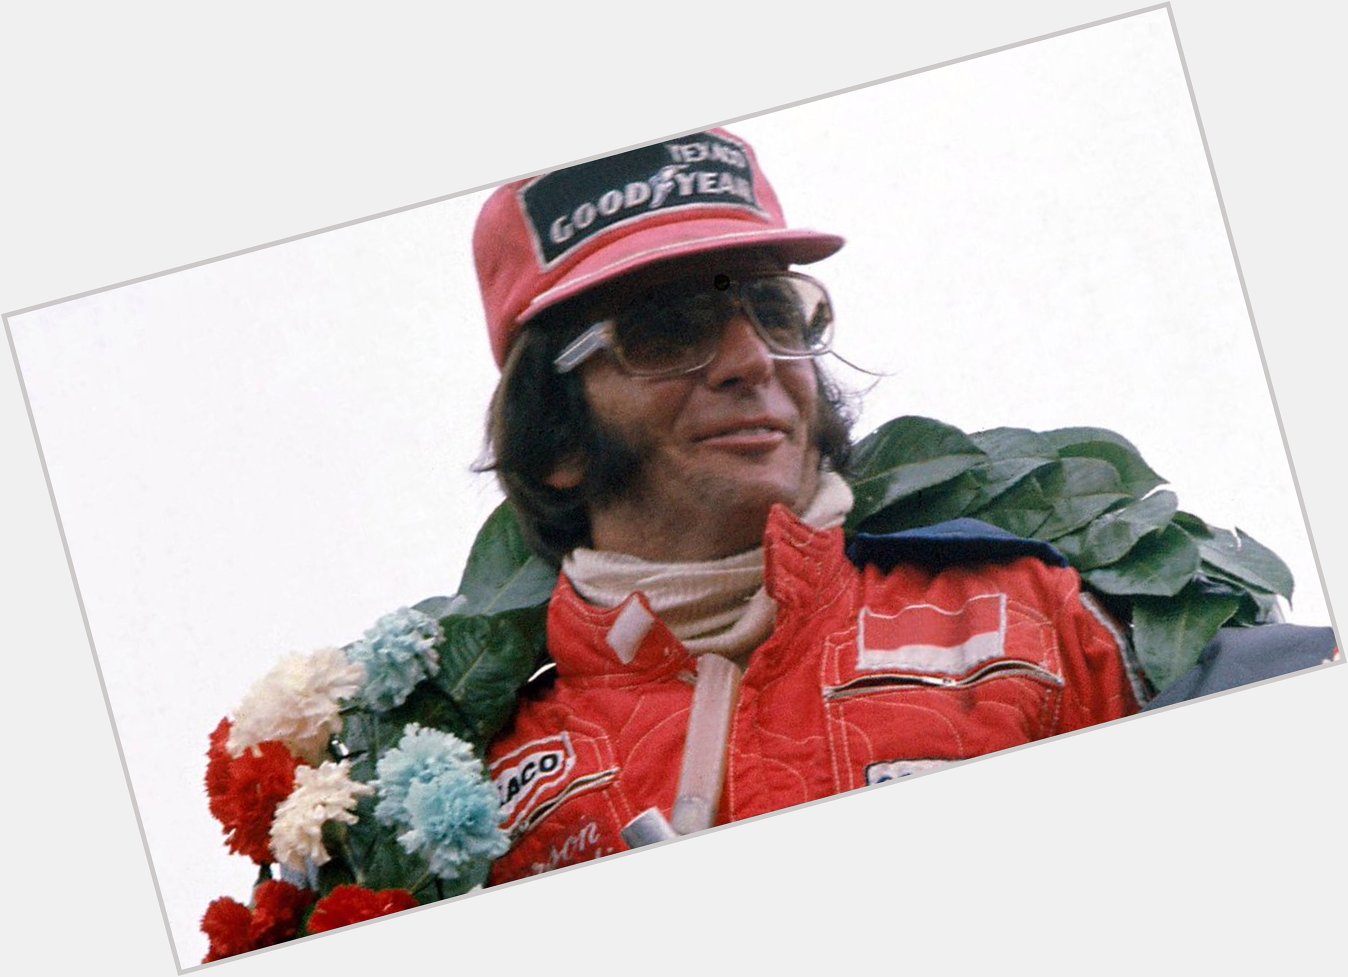 Happy 72nd birthday to Emerson Fittipaldi.
A double F1 and Indianapolis winner. 